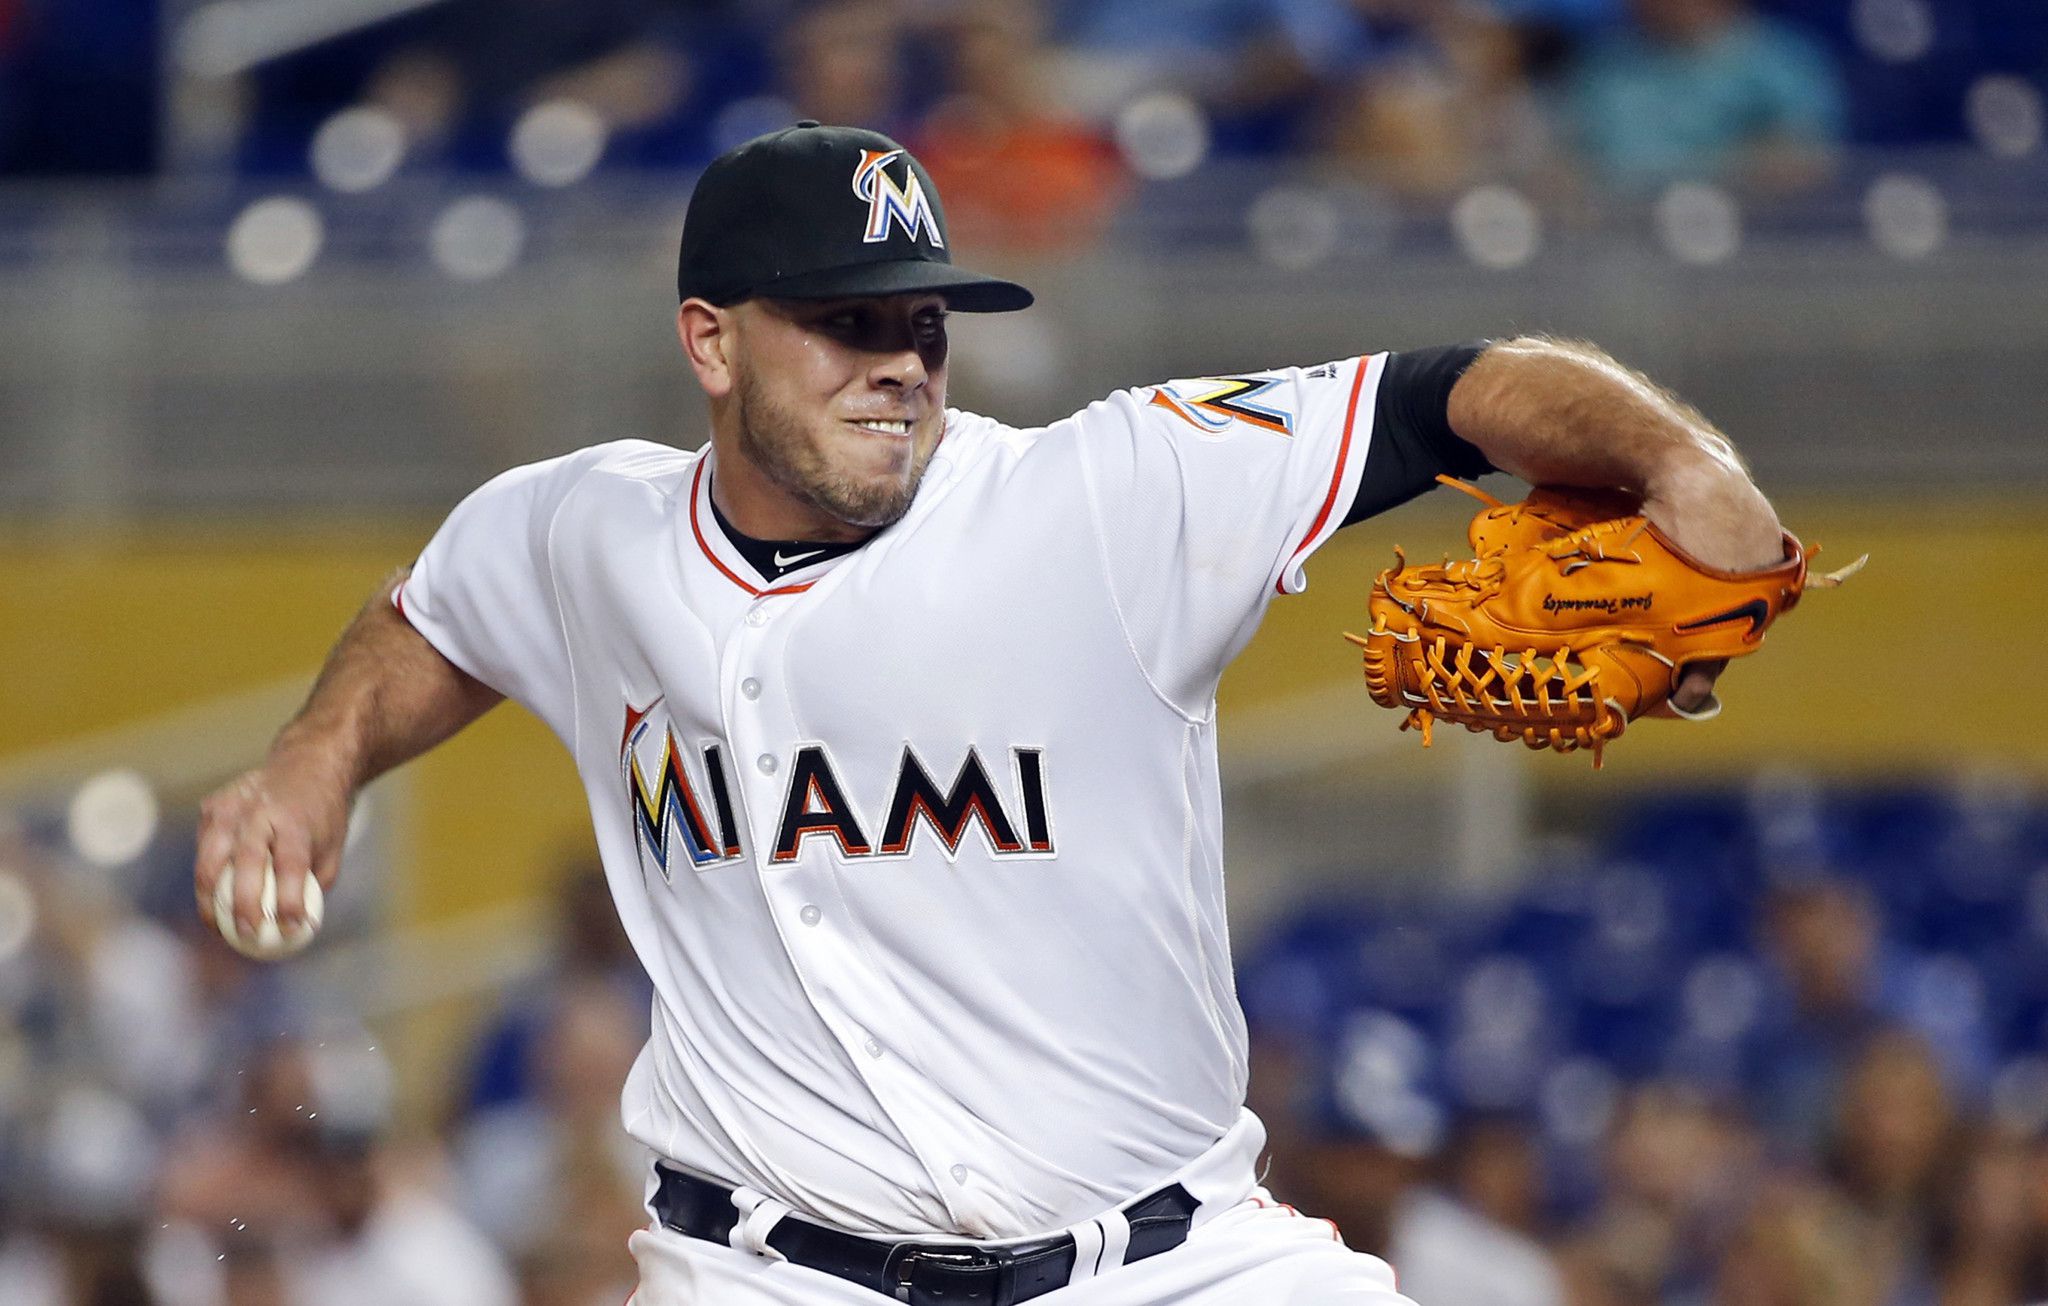 Jose Fernandez's Legacy Will Live On–In Trust for His Unborn